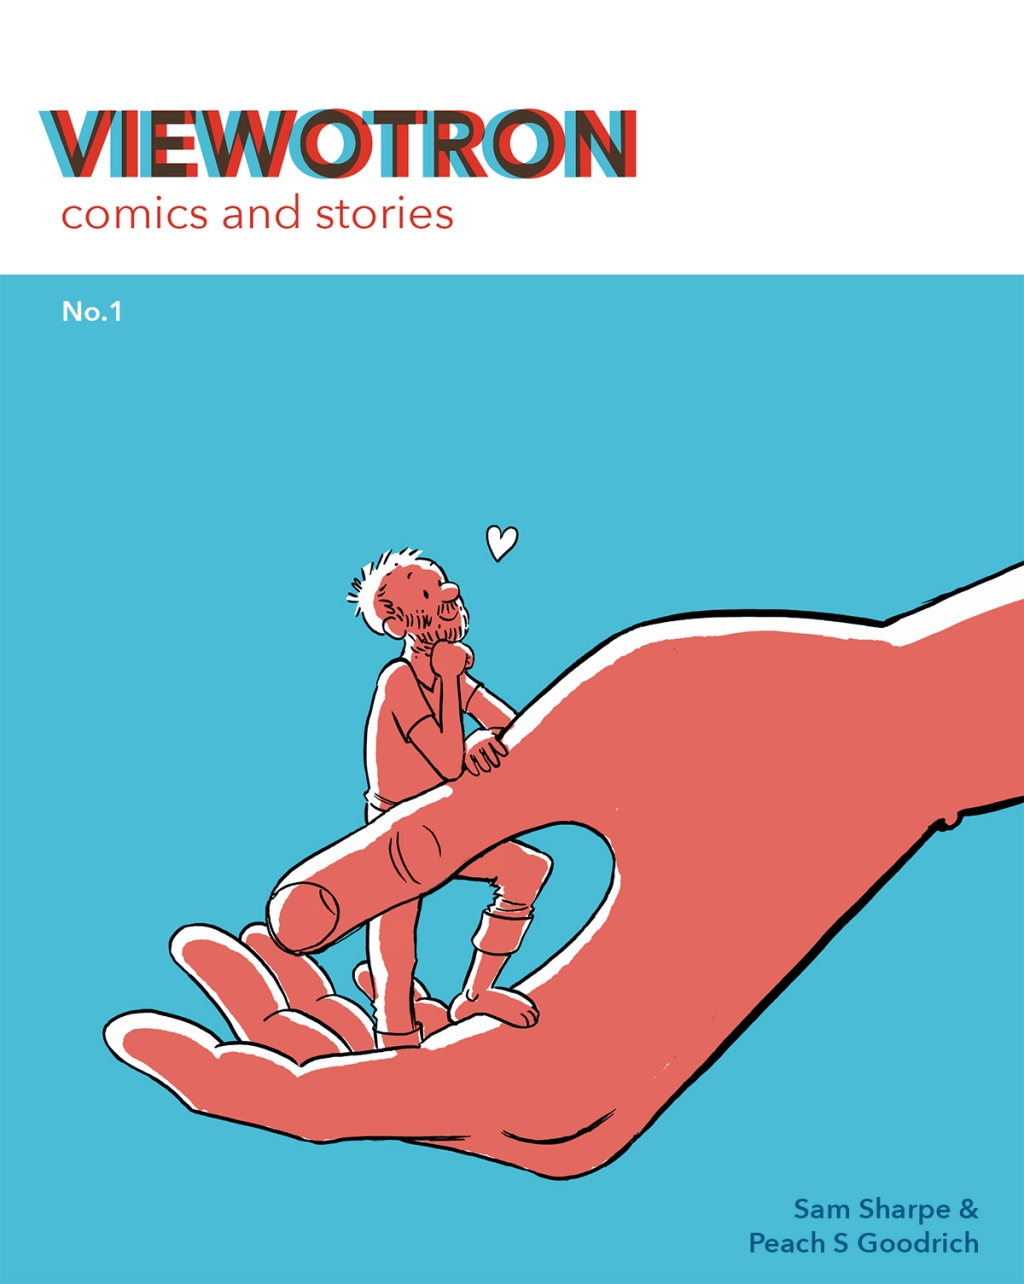 Viewotron #1 in August from AdHouse Books